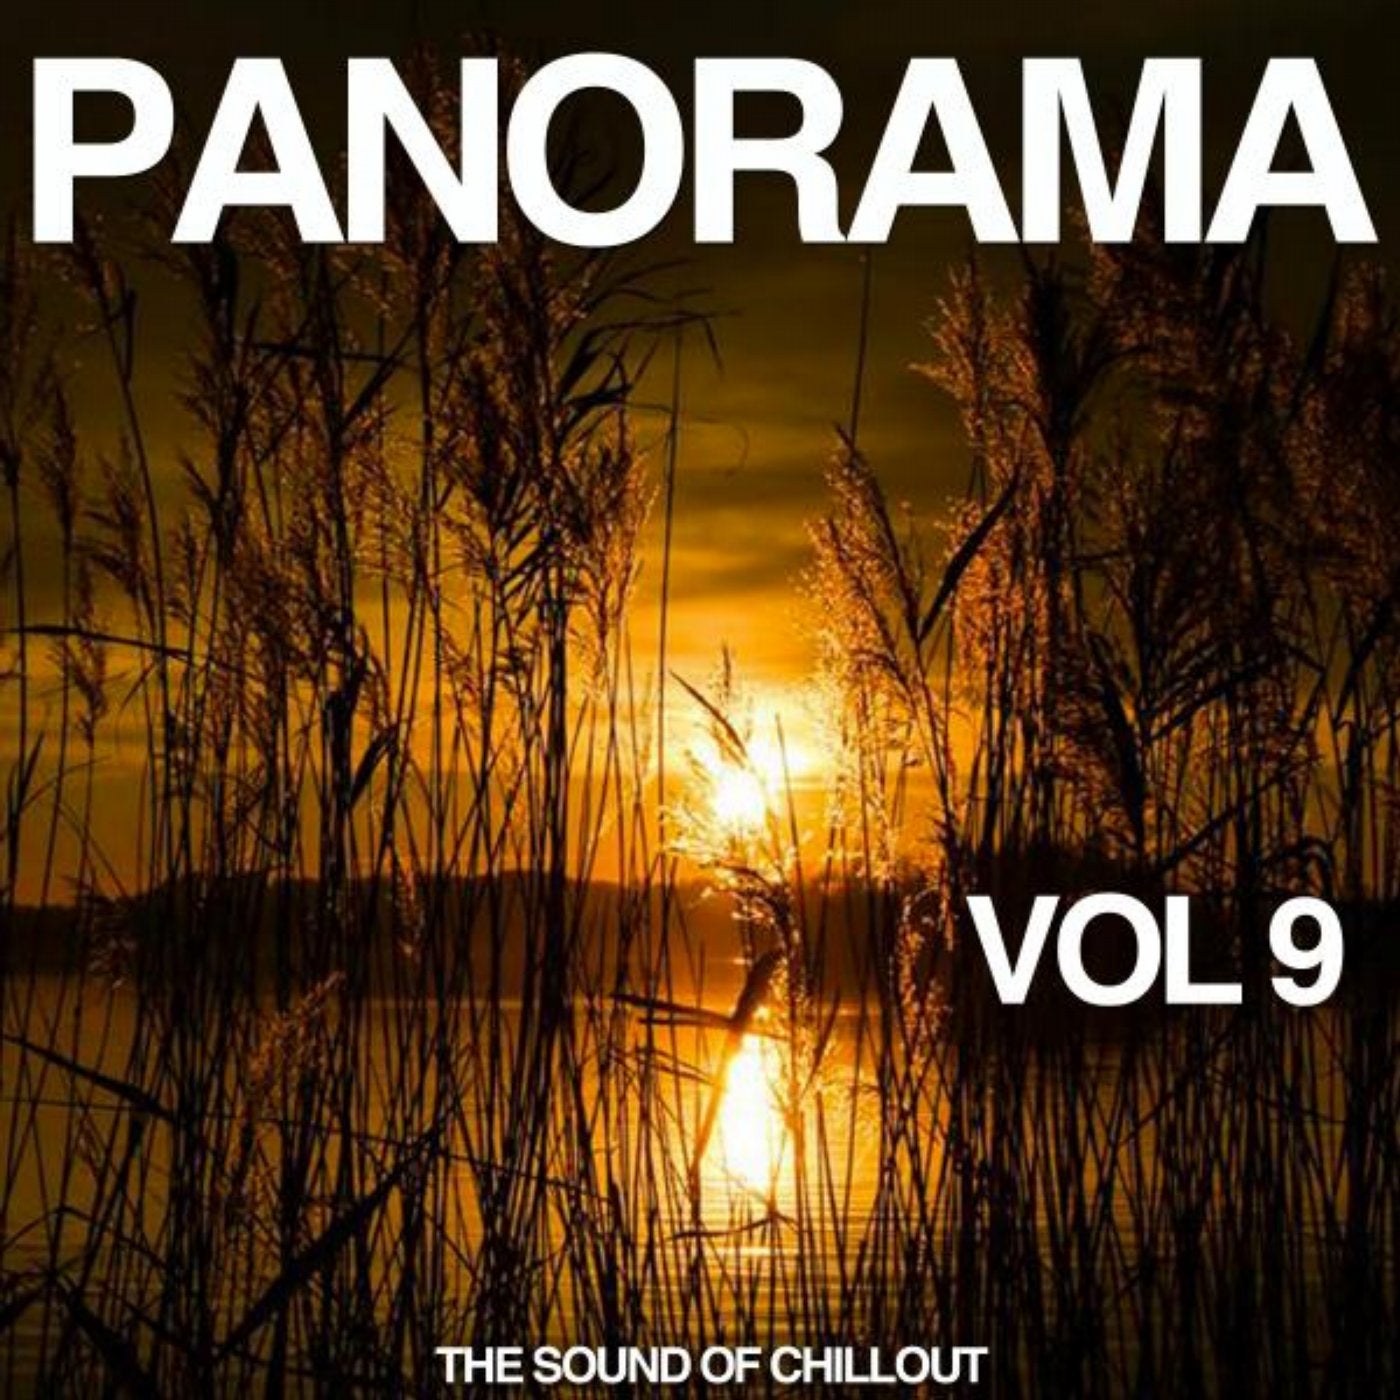 Panorama, Vol. 9 (The Sound of Chillout)